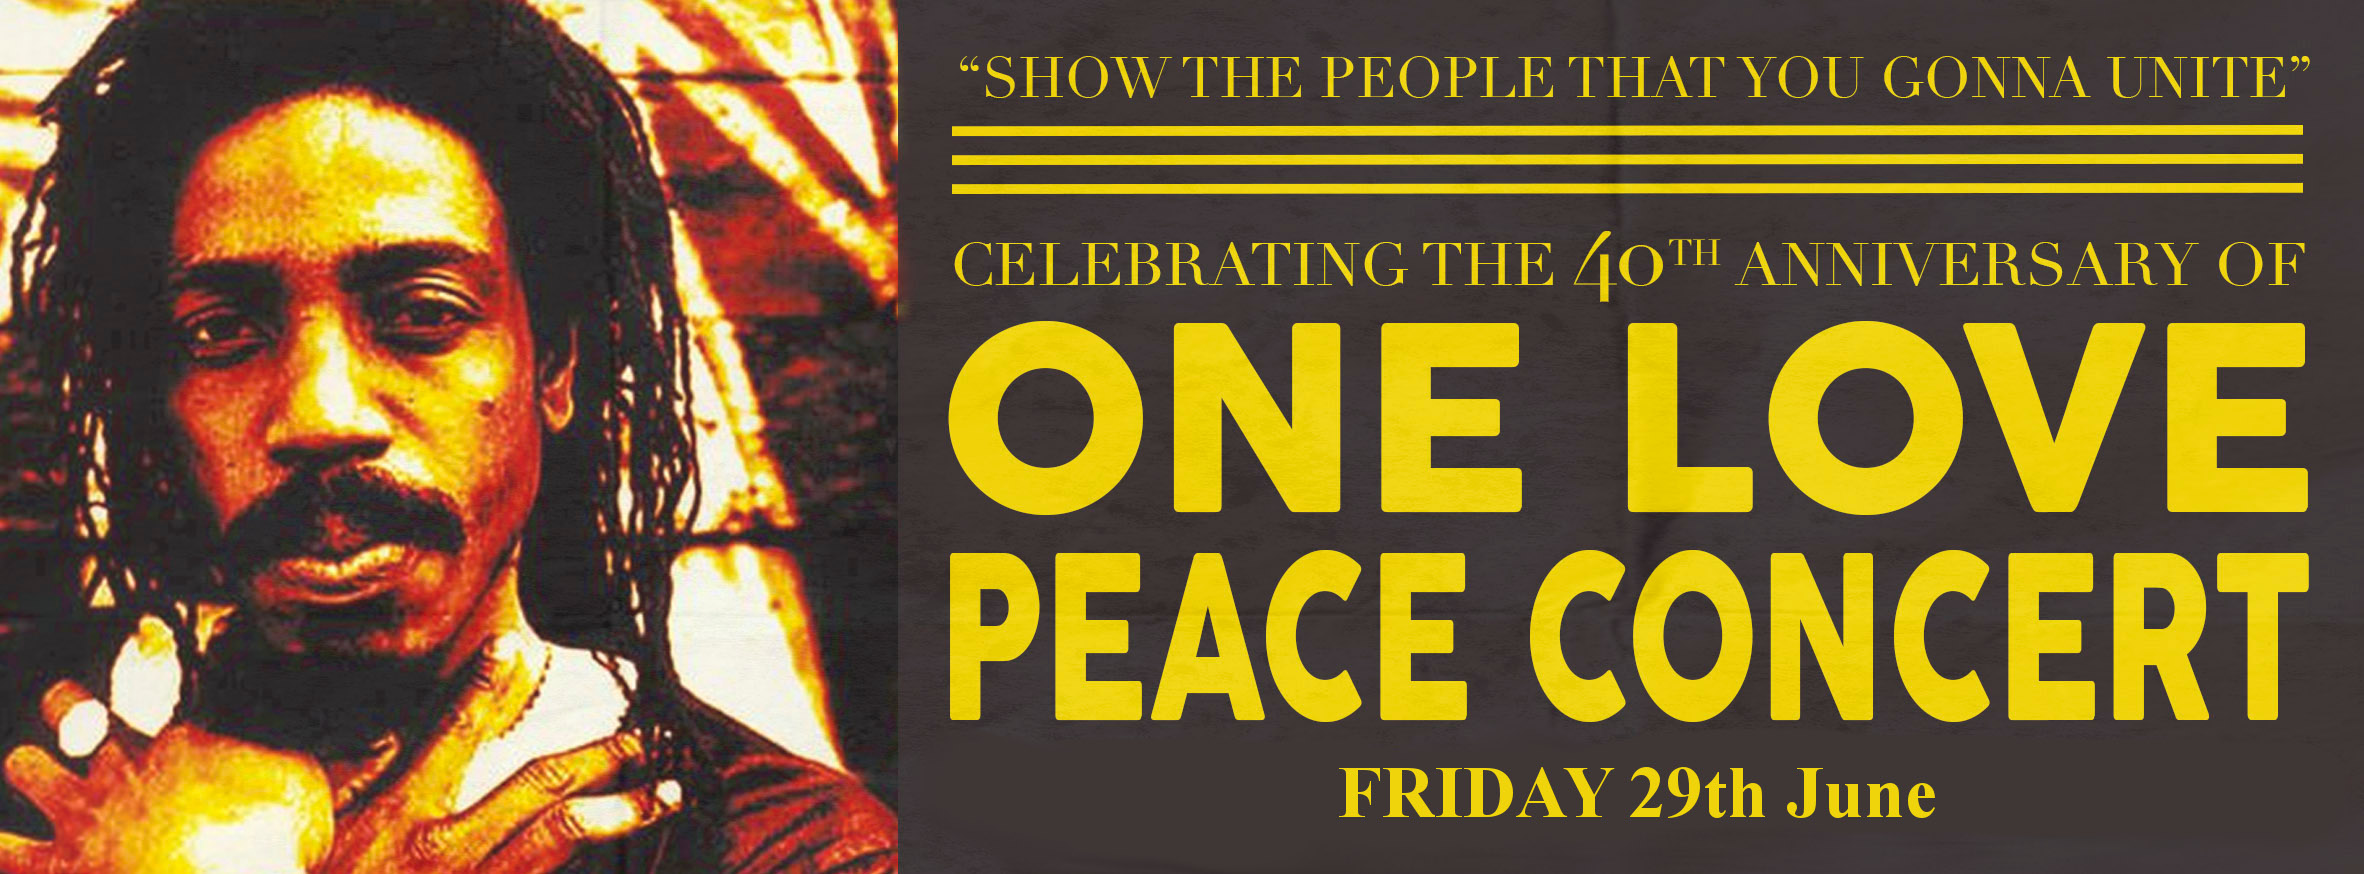 One Love Peace Concert 40th Anniversary featuring Earl 16 Celebration at Hideaway Jazz Club